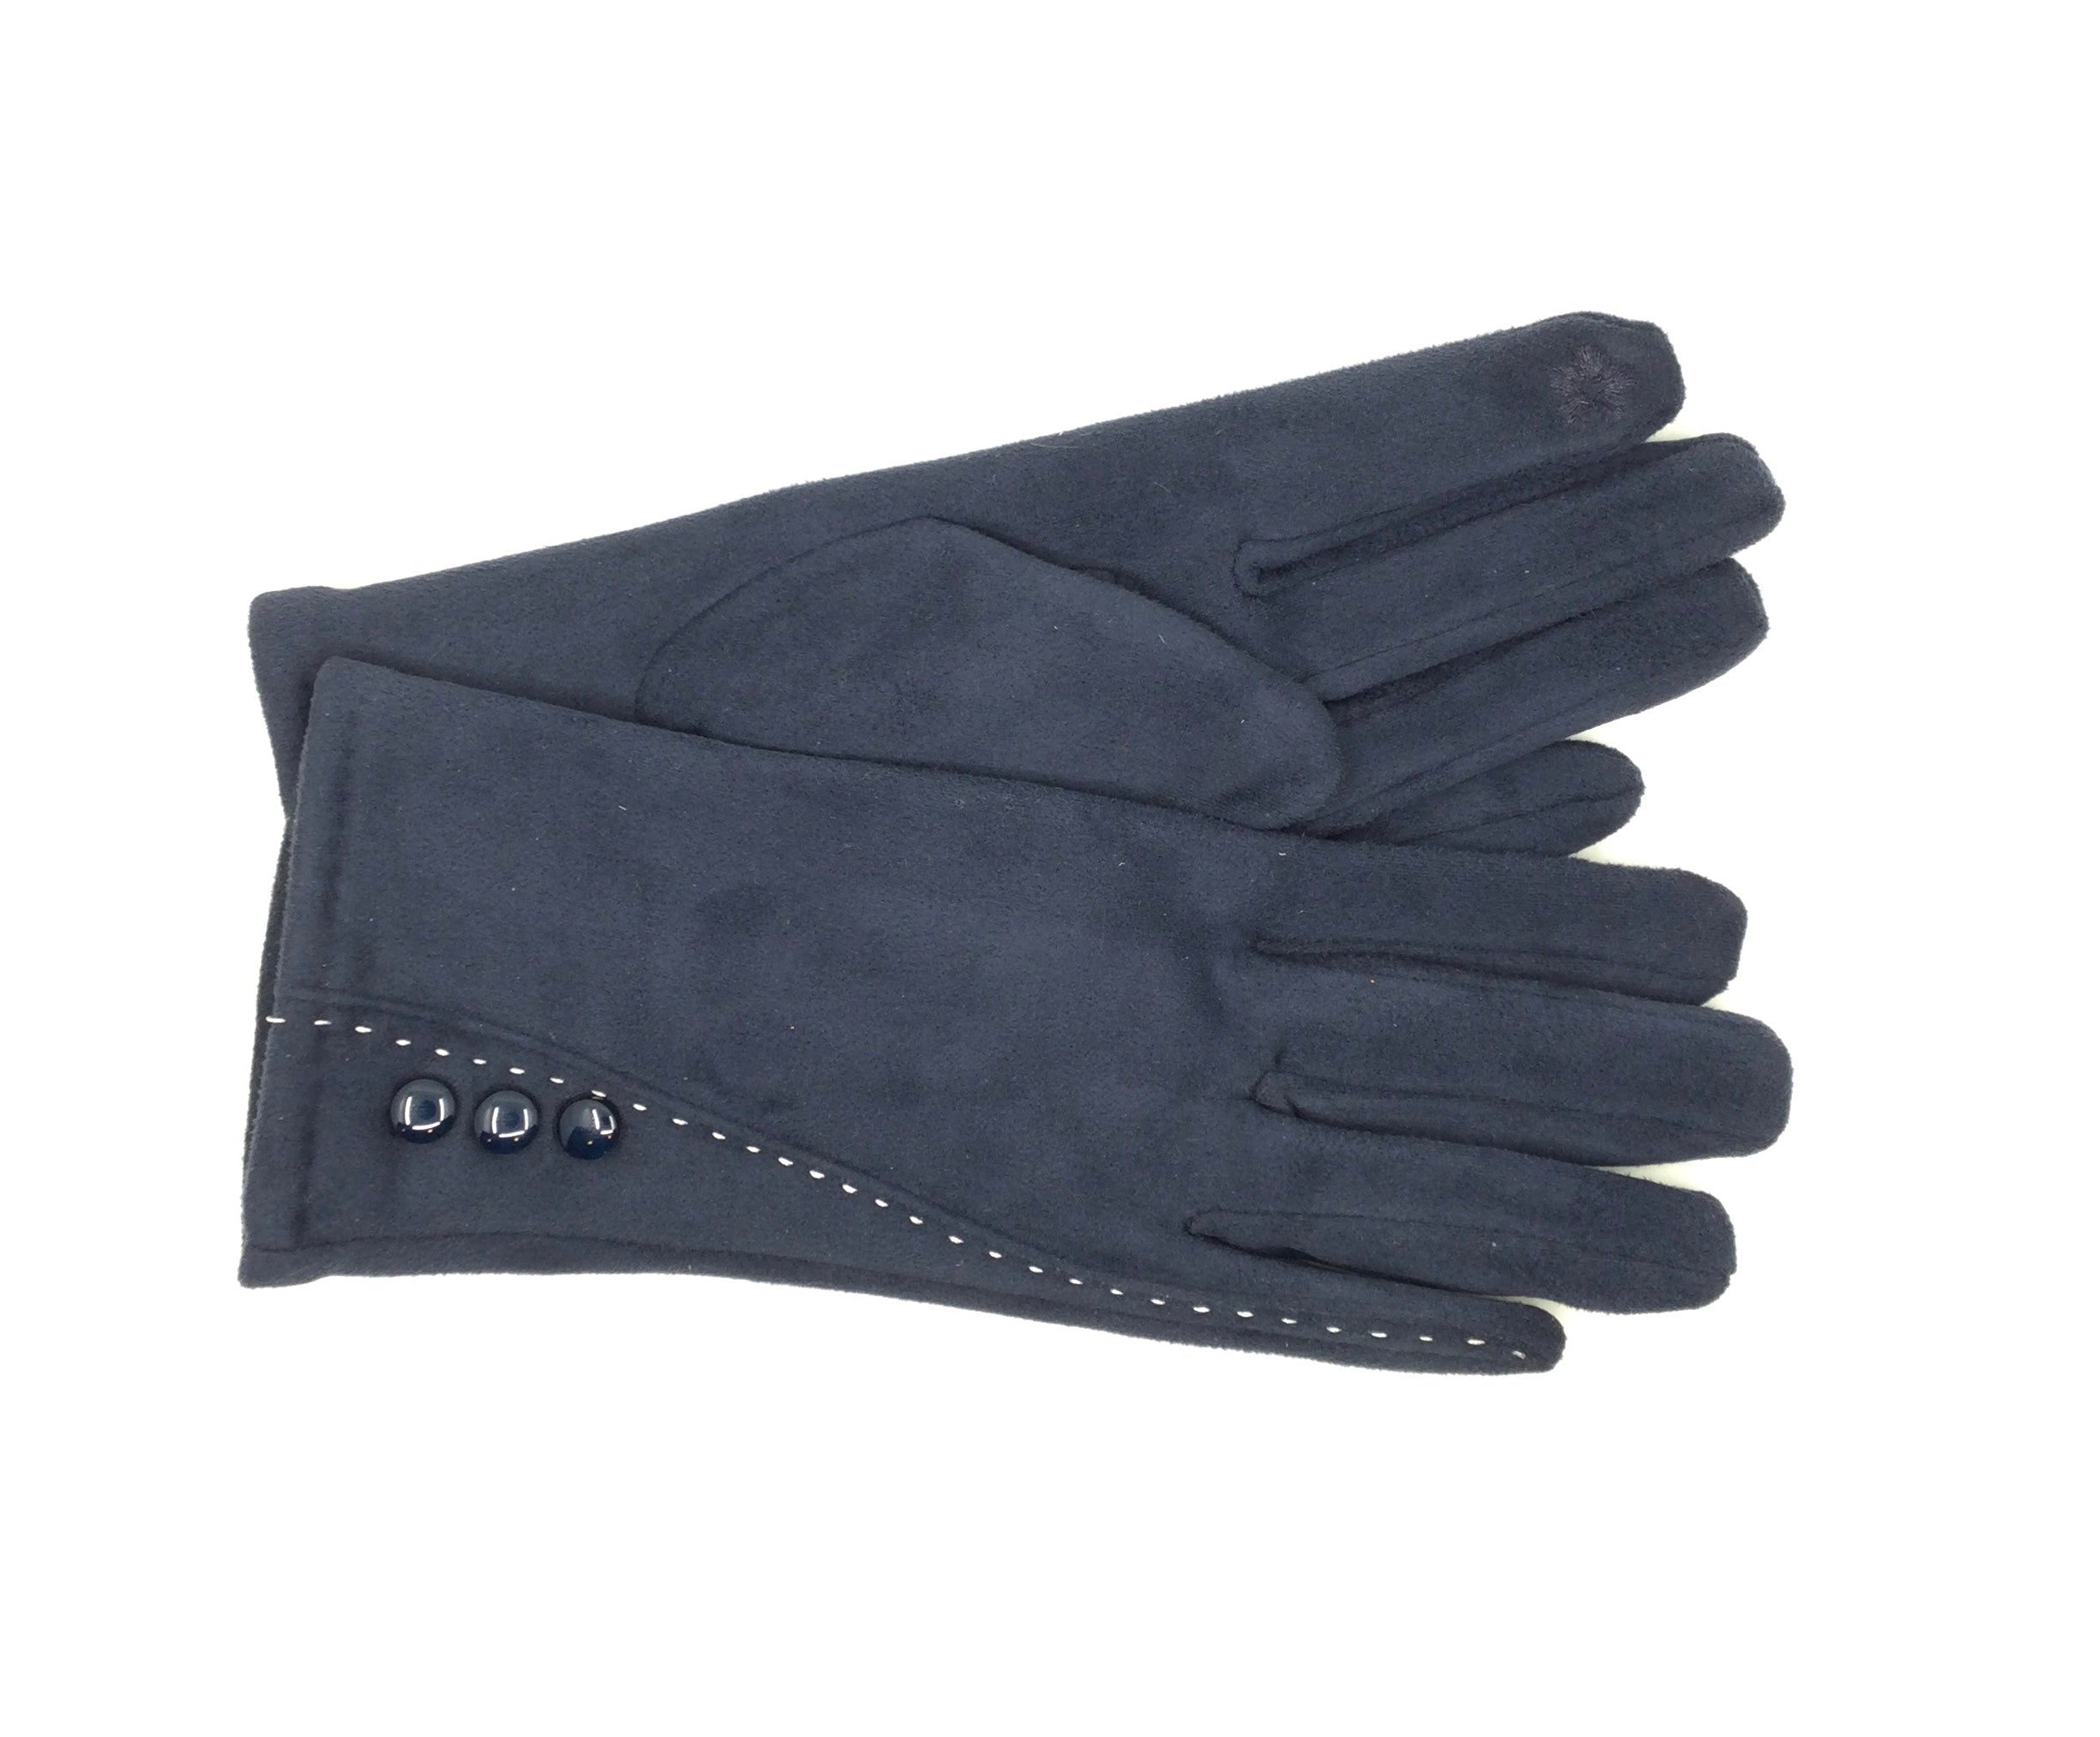 Fashion Gloves with Decorative Wrist Buttons